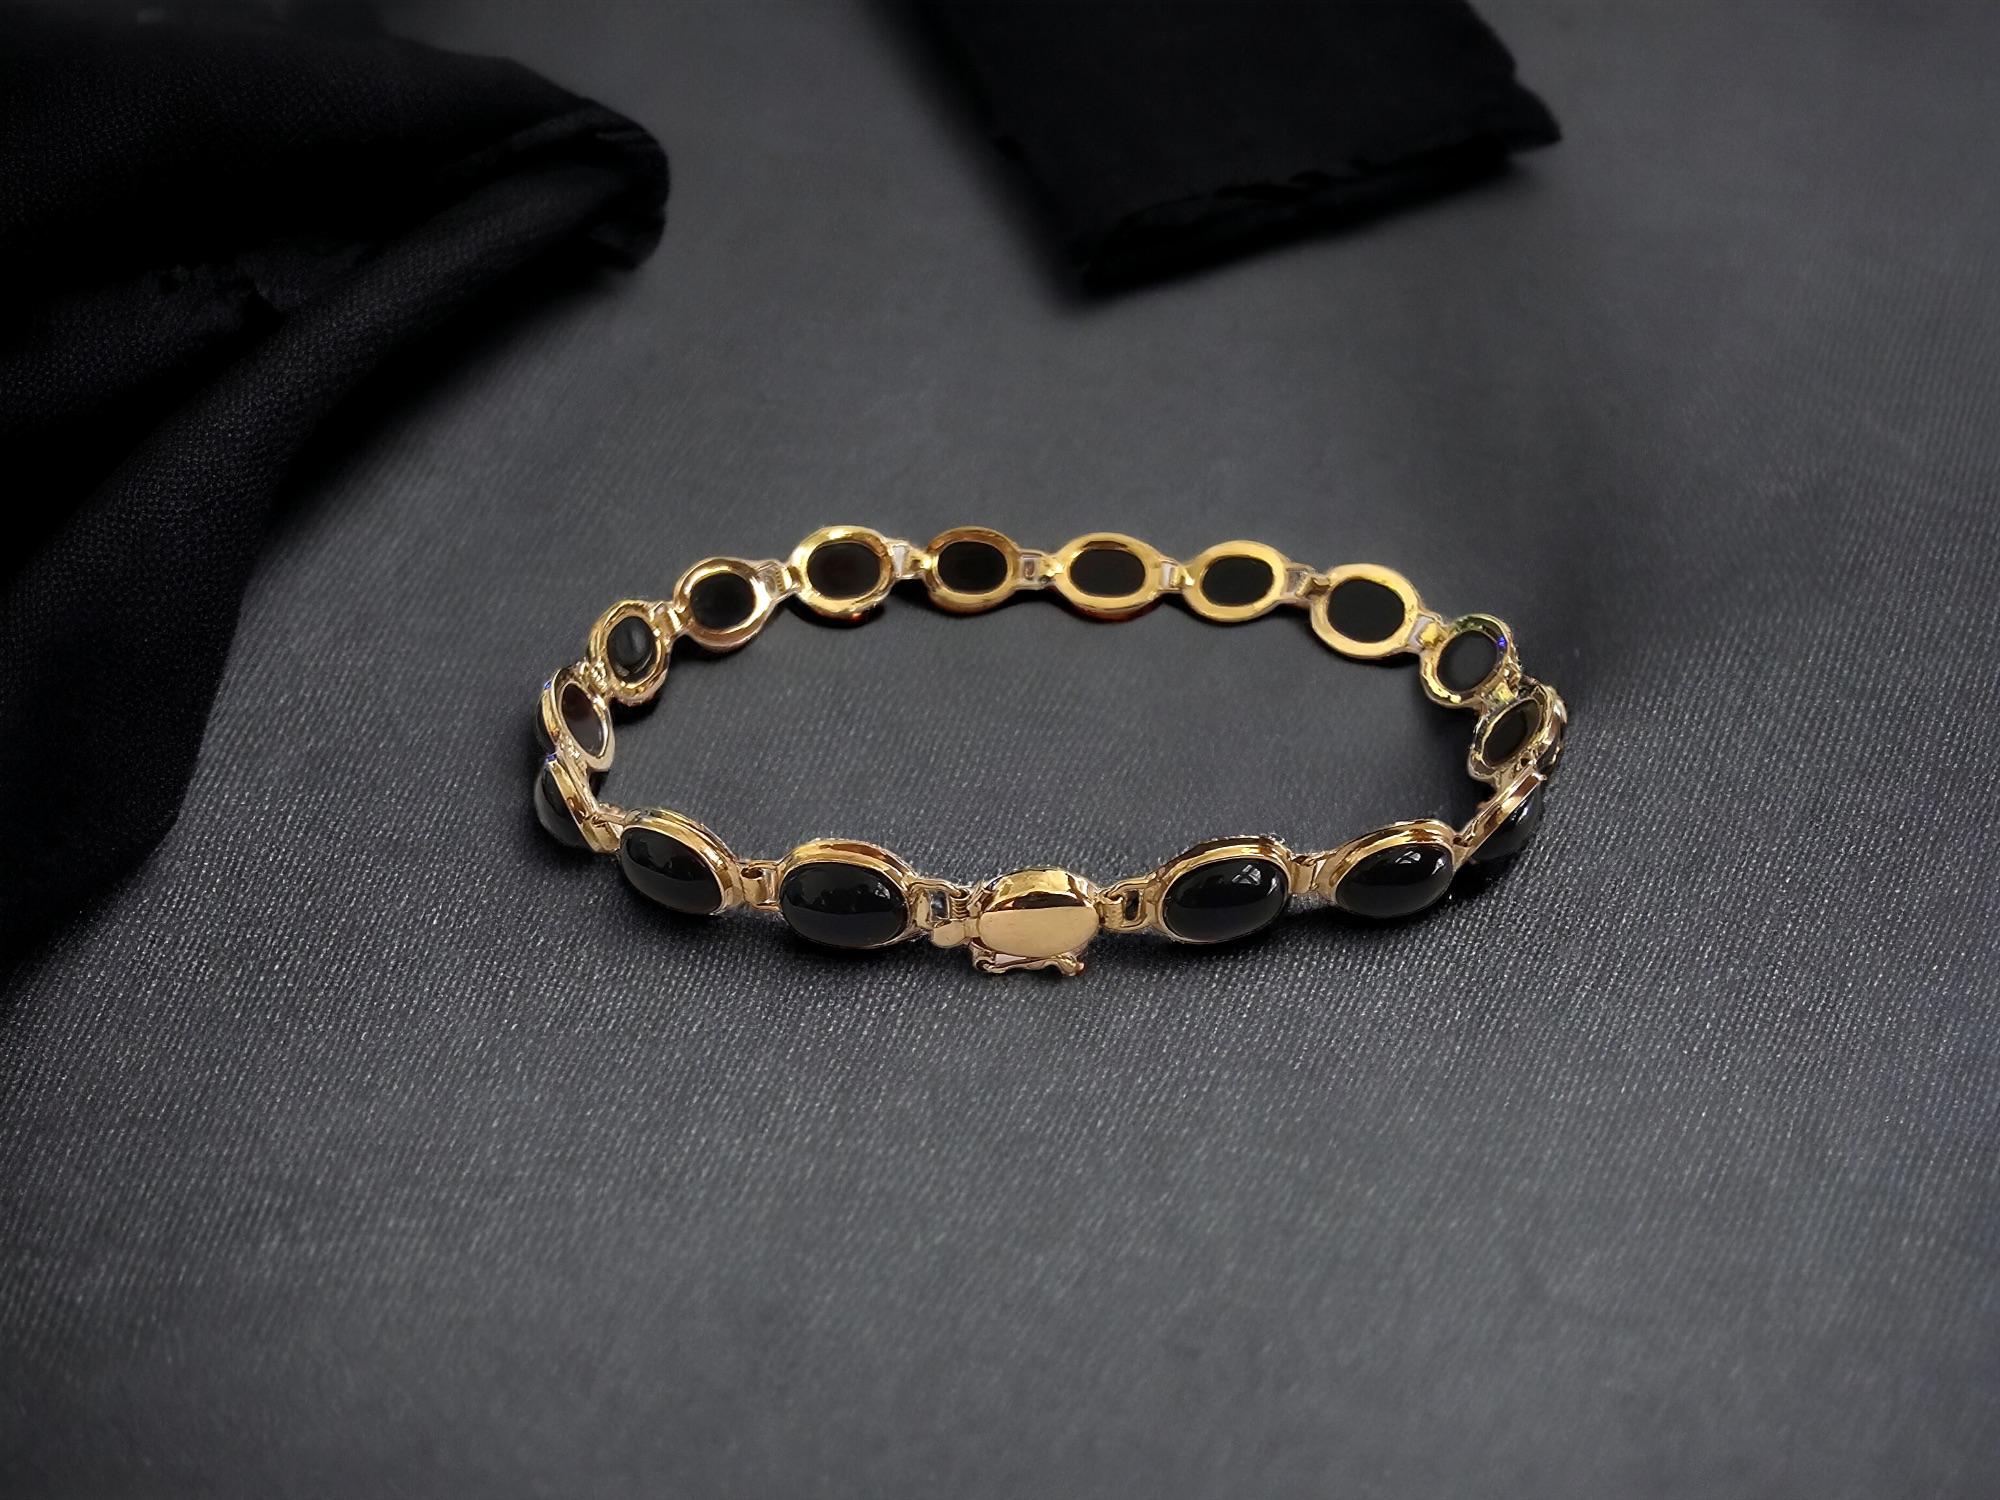 Mixed Cut Tibetan Black Onyx Beaded Bracelet (with 14K Solid Yellow Gold) For Sale